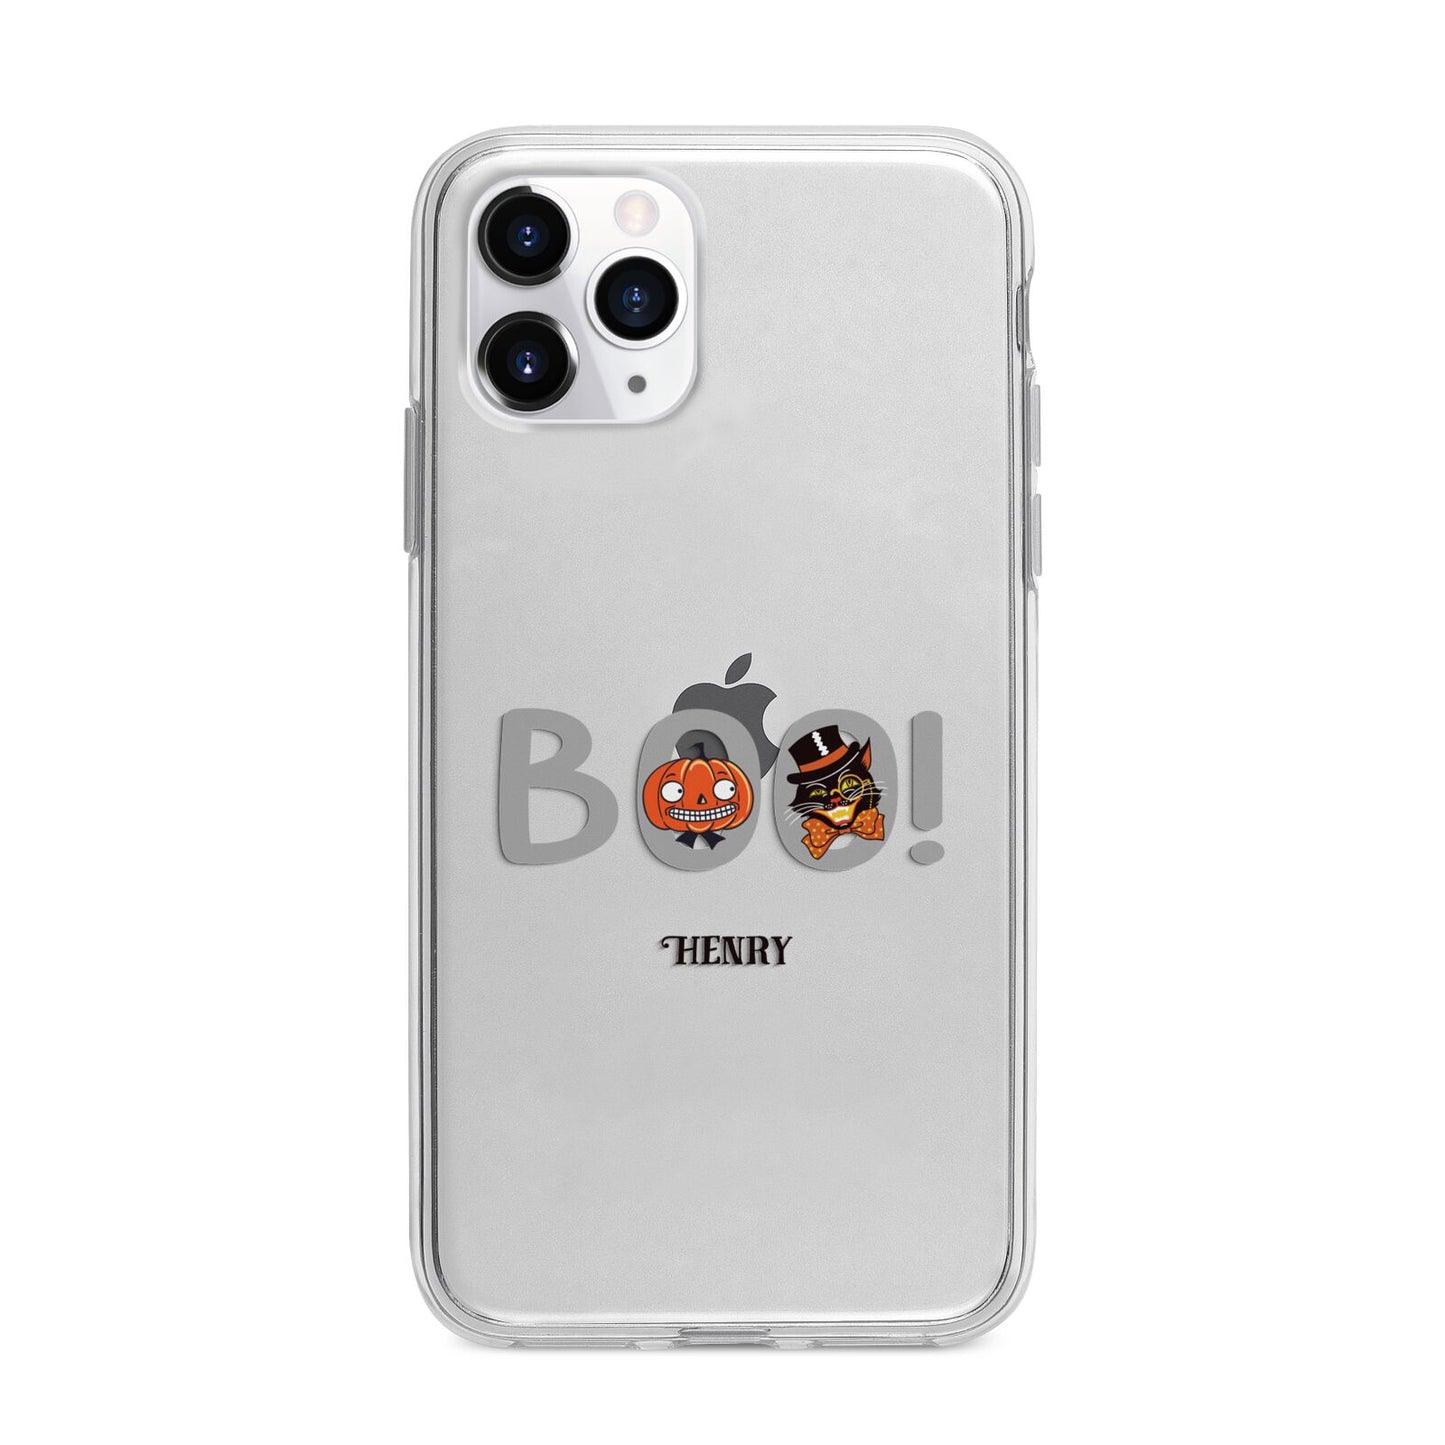 Boo Personalised Apple iPhone 11 Pro in Silver with Bumper Case